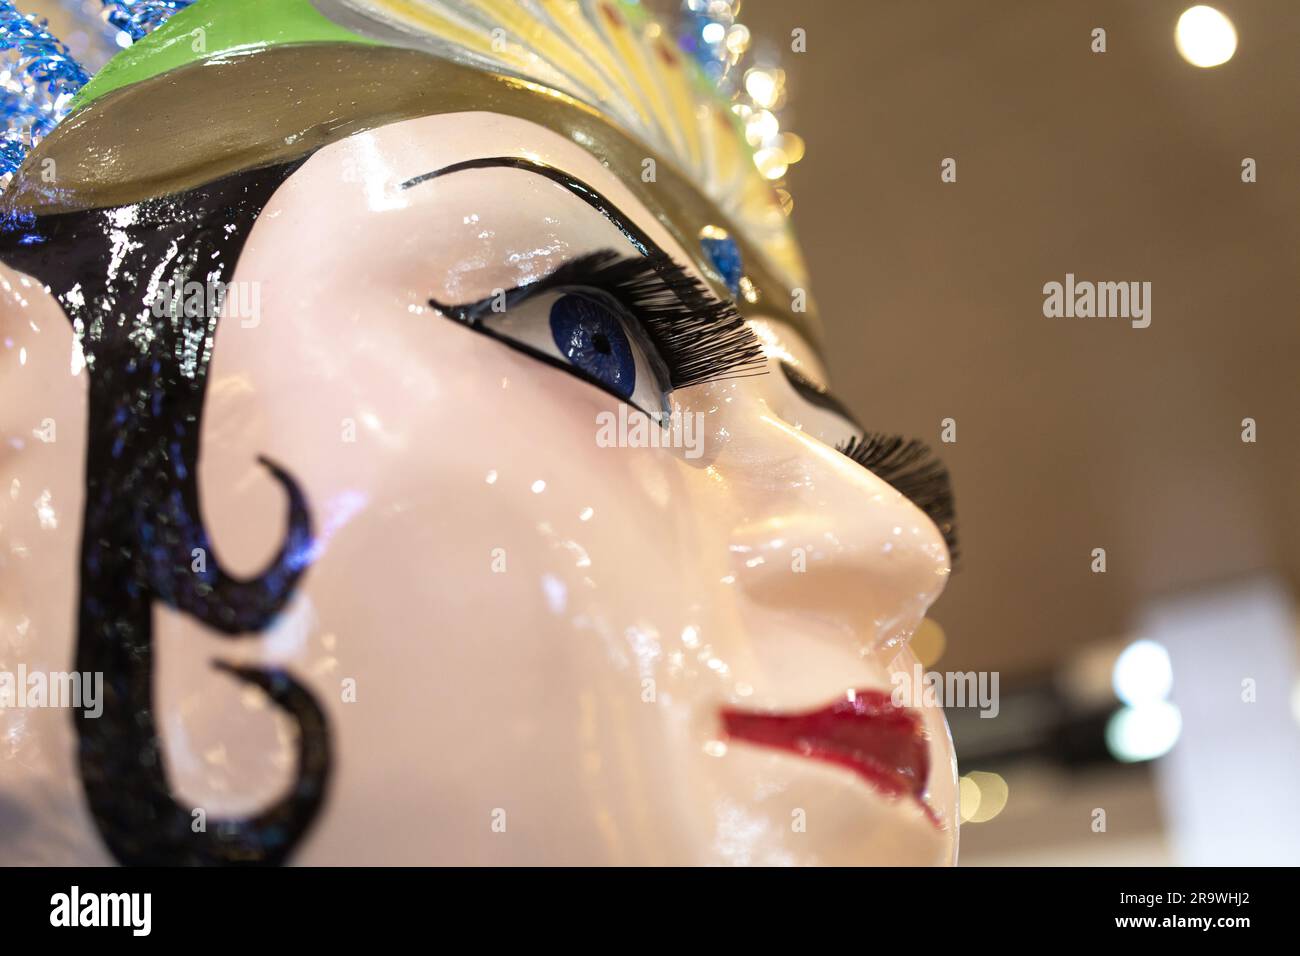 Close up on the face of Ondel-Ondel, large puppet figure featured in Betawi folk. Stock Photo